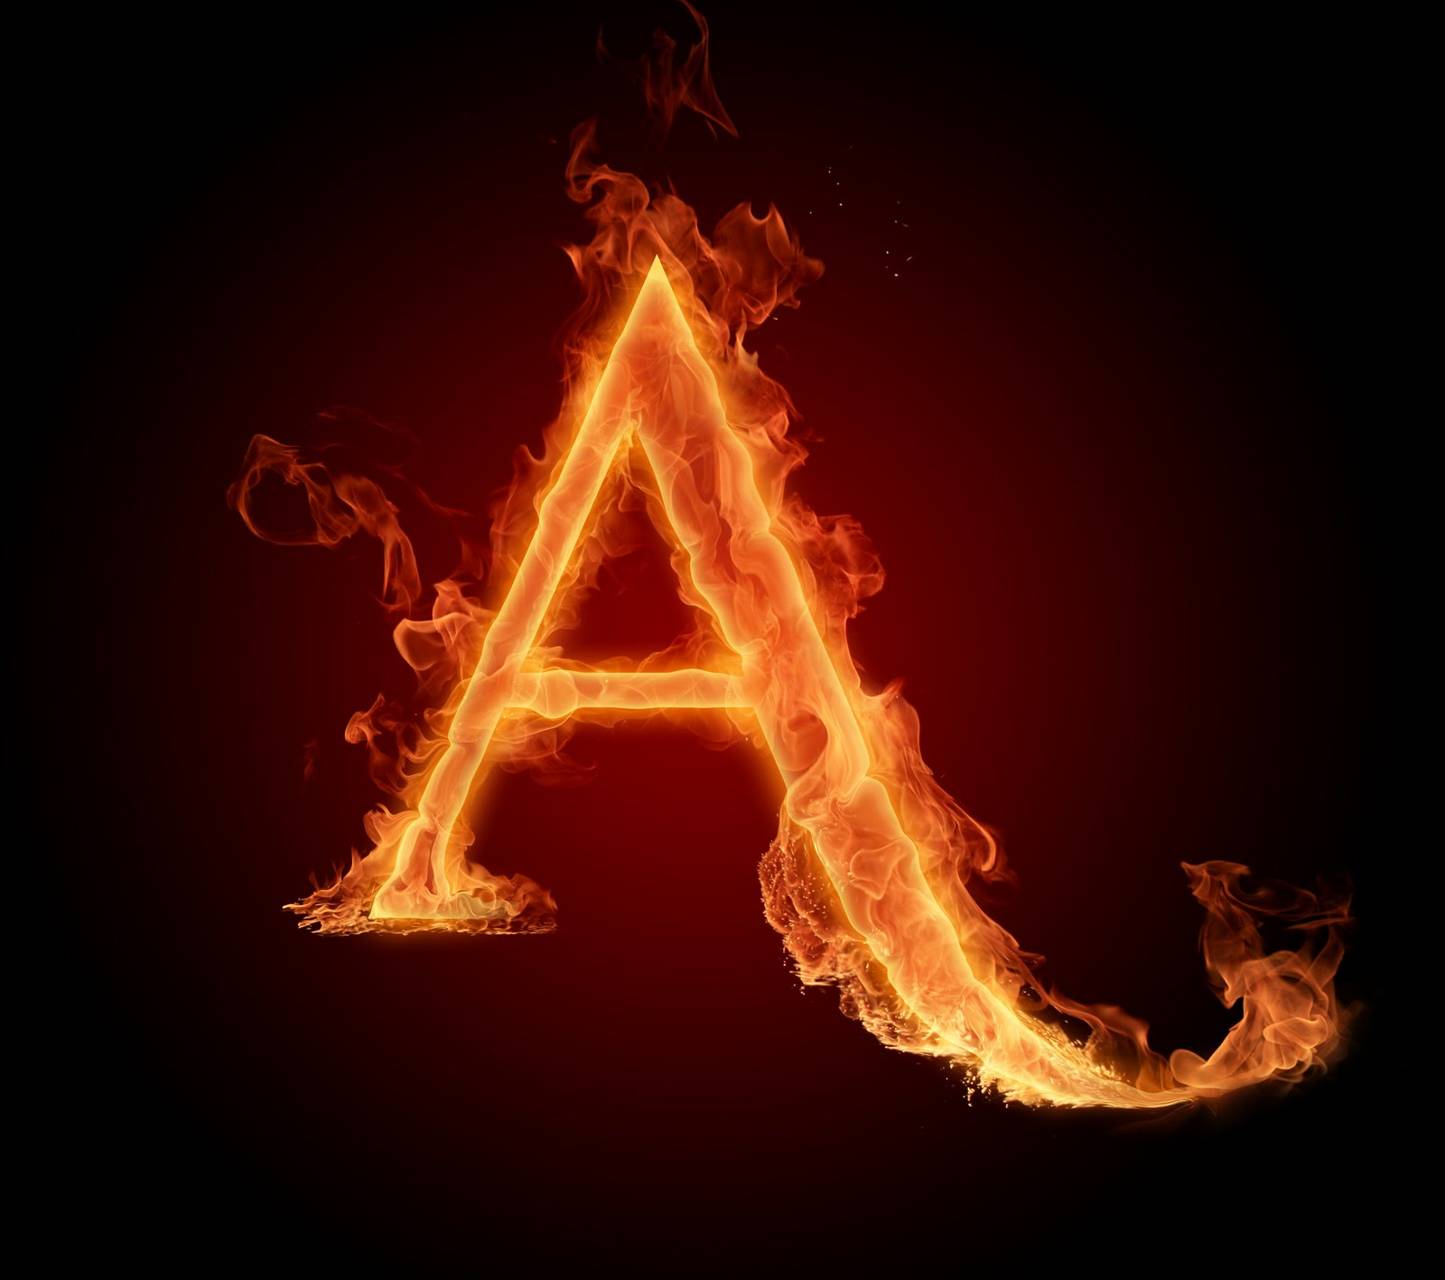 Letter A Wallpapers For Mobile - Wallpaper Cave